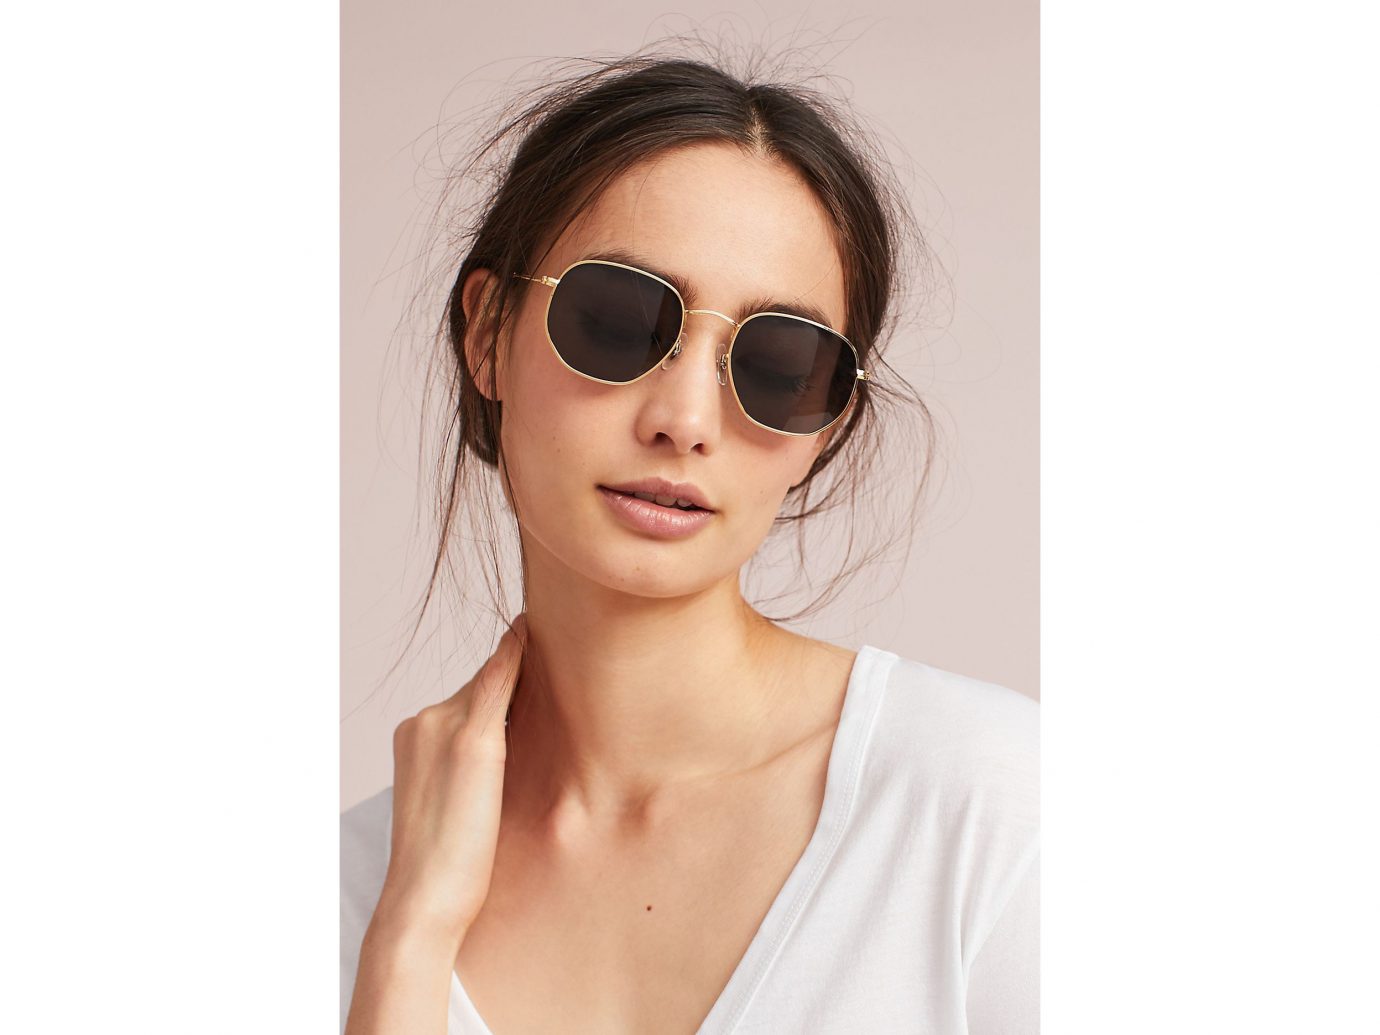 Spring Travel Style + Design Summer Travel Travel Lifestyle Travel Shop person eyewear sunglasses vision care woman wearing fashion model posing glasses white brown hair beige health & beauty spectacles beautiful pretty goggles